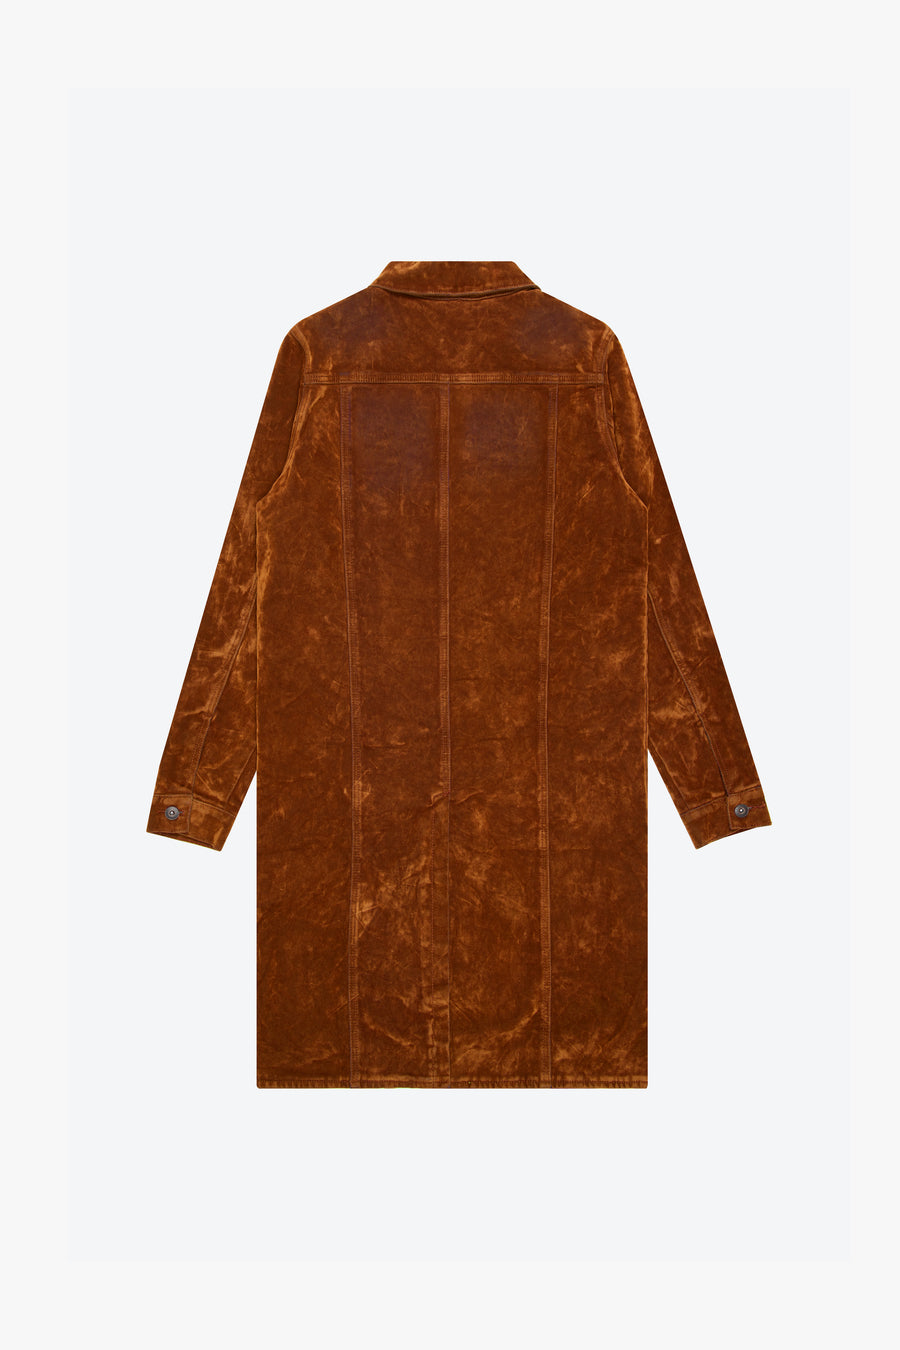 "NOCTURNE" BROWN SUEDE TRENCH COAT